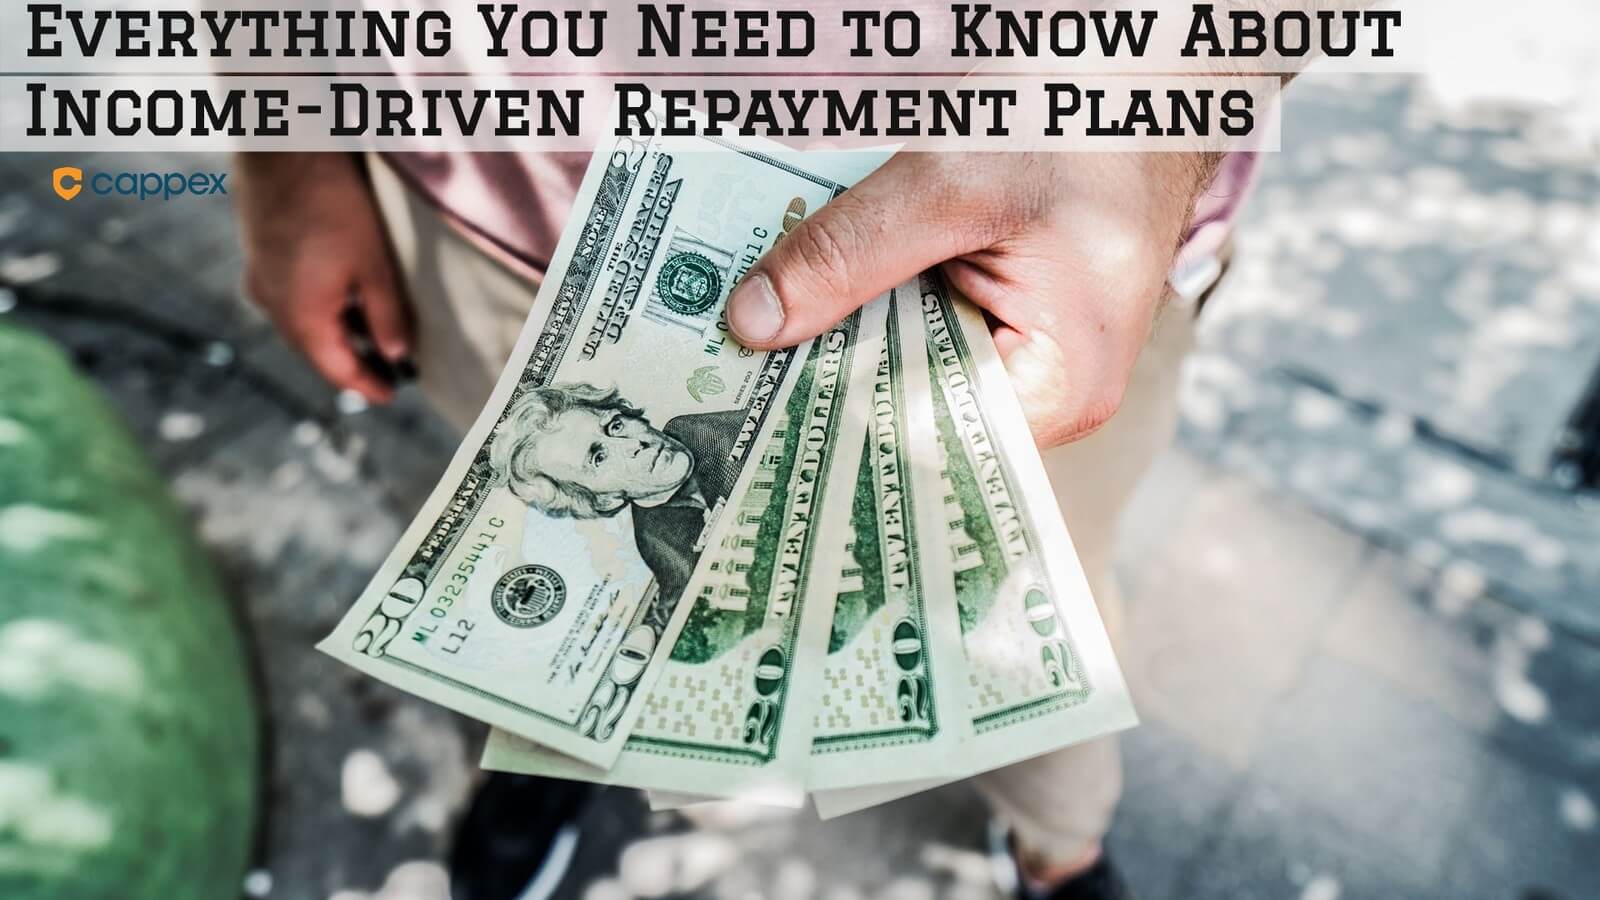 Everything You Need to Know About Income-Driven Repayment Plans